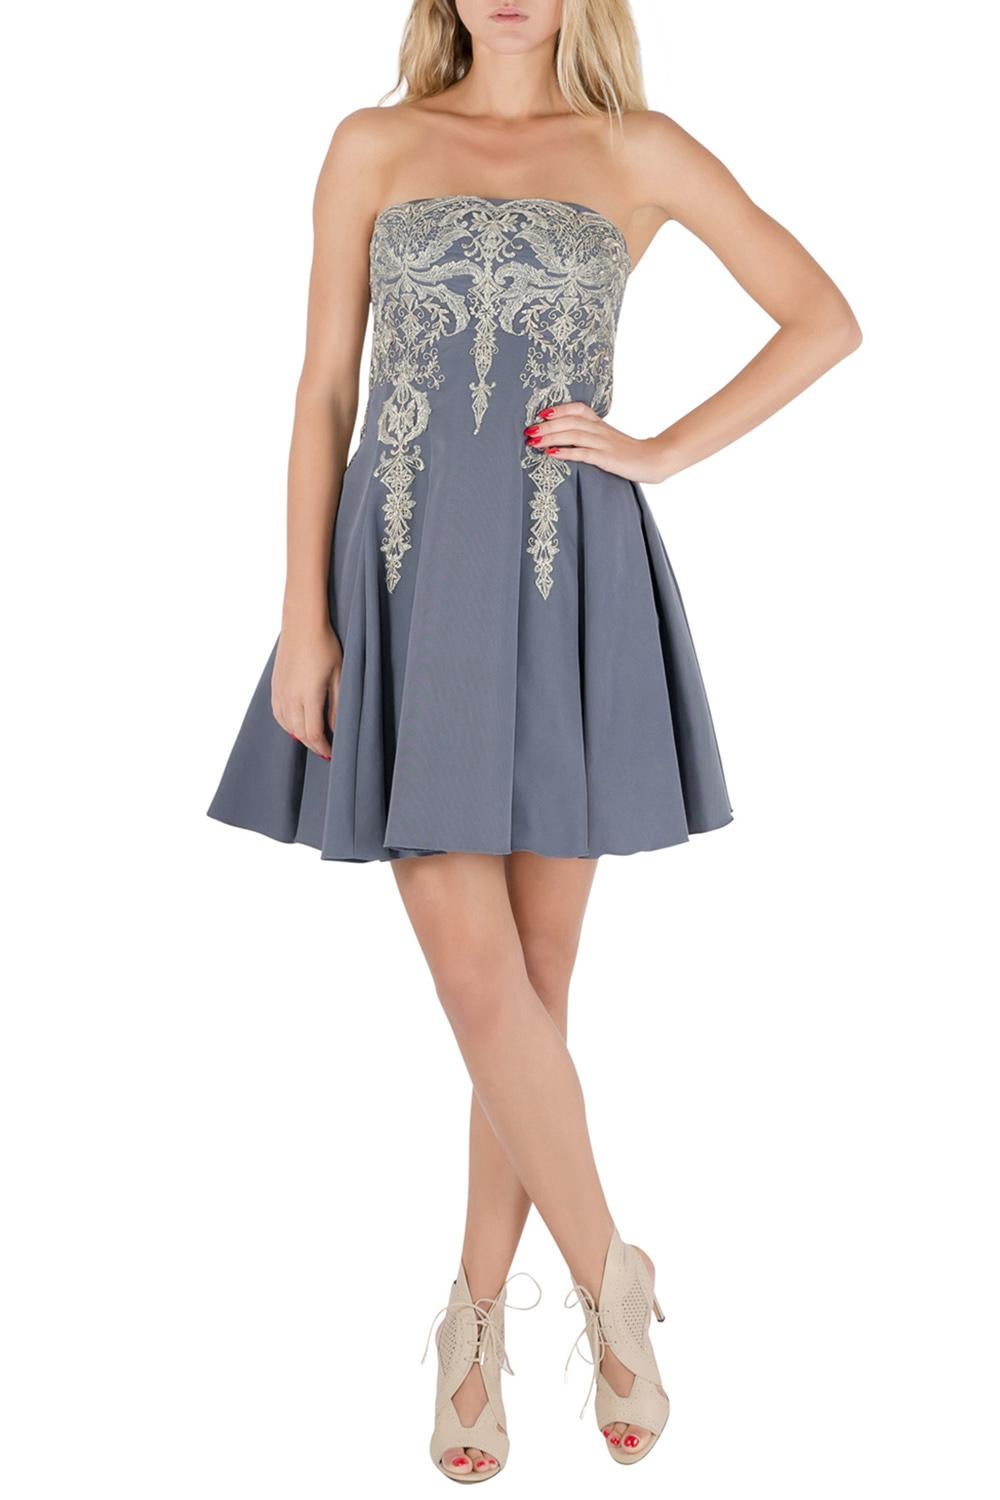 Gray Marchesa Notte Grey Cotton Silk Tulle Embroidered Applique Strapless Dress S